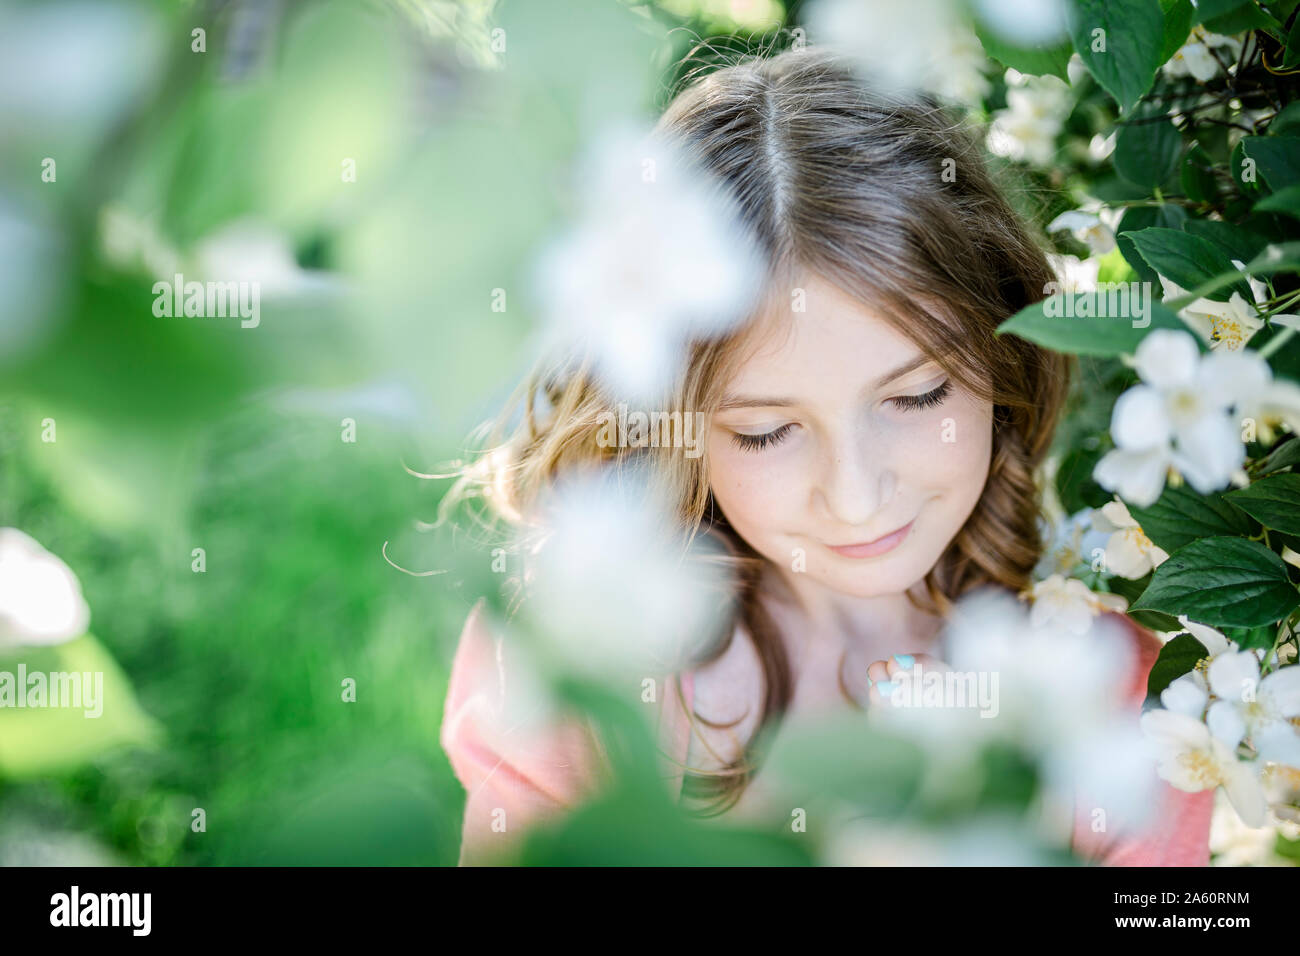 Portrait of girl with closed eyes in the garden Stock Photo